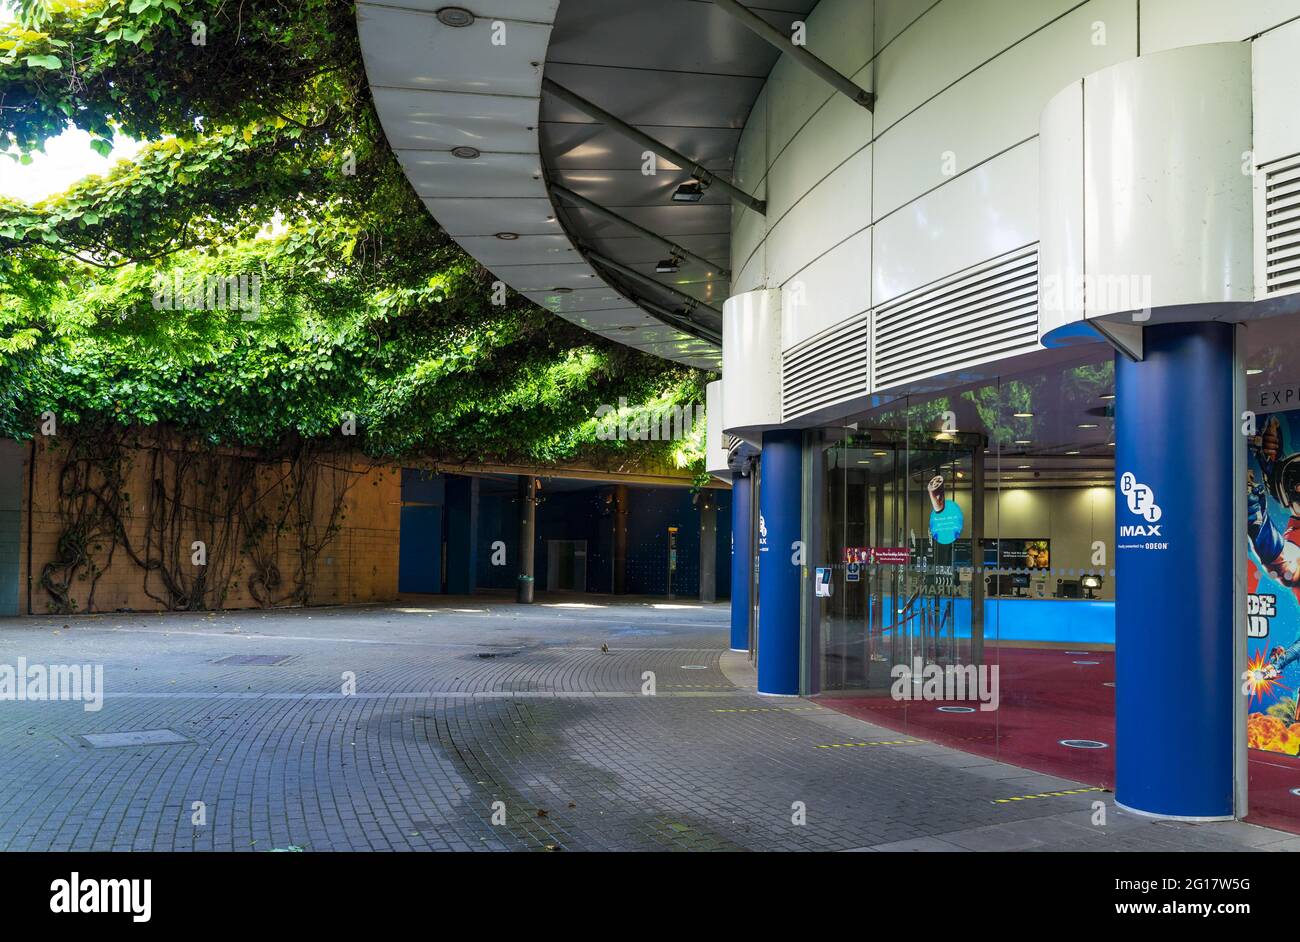 The overgrown and dingy underground entrance to the Odeon BFI IMAX Cinema at Waterloo. London - 5th June 2021 Stock Photo